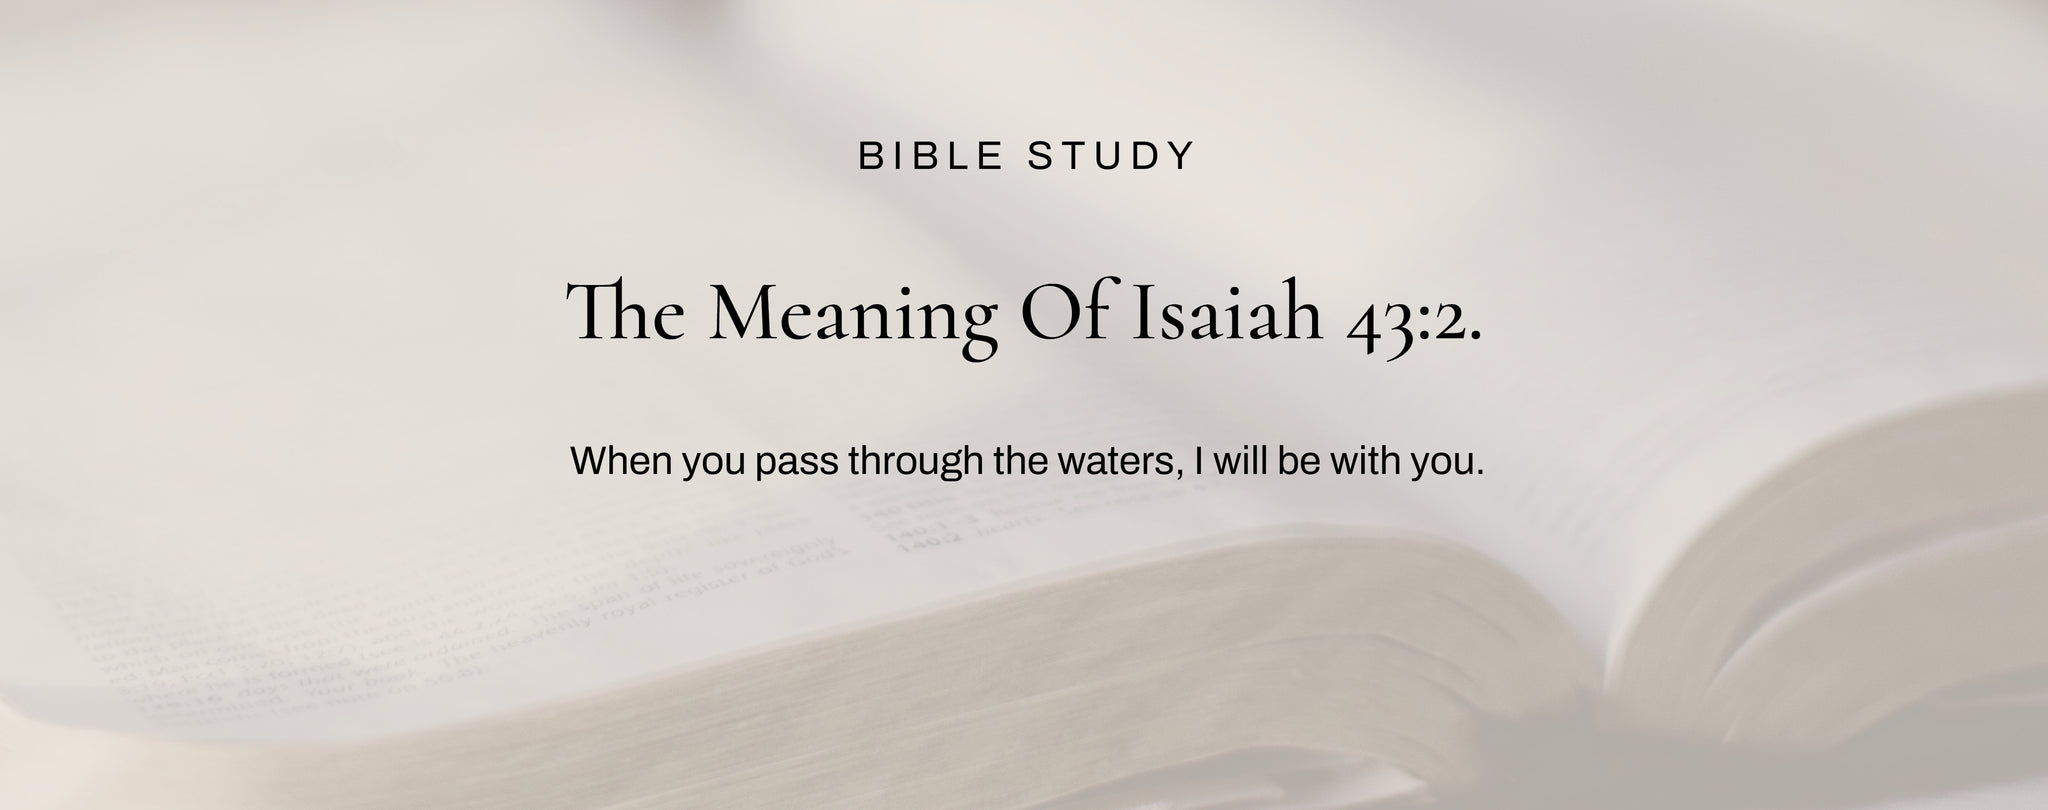 What Does Isaiah 43:2 Mean?